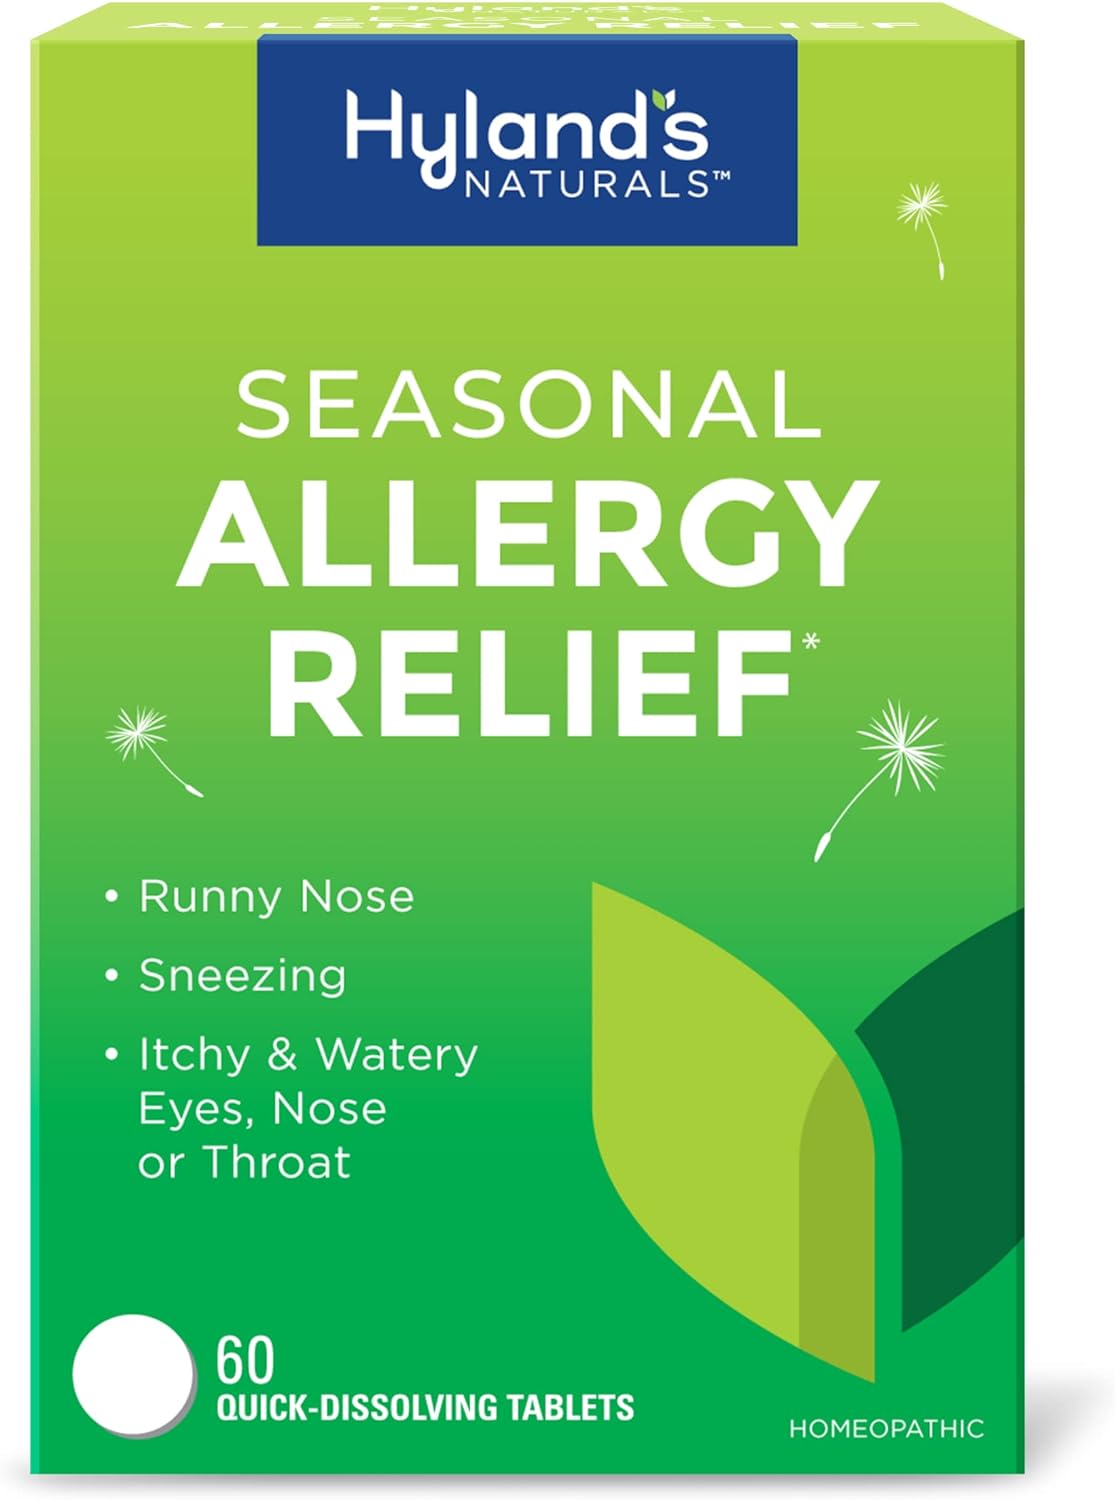 Hyland's Naturals Indoor & Outdoor, Non Drowsy Seasonal Allergy Relief Pills, For Sneezing, Runny Nose, Itchy & Watery Eyes, Nose or Throat, Safe & Natural, Quick Dissolving Tablets, 60 Count